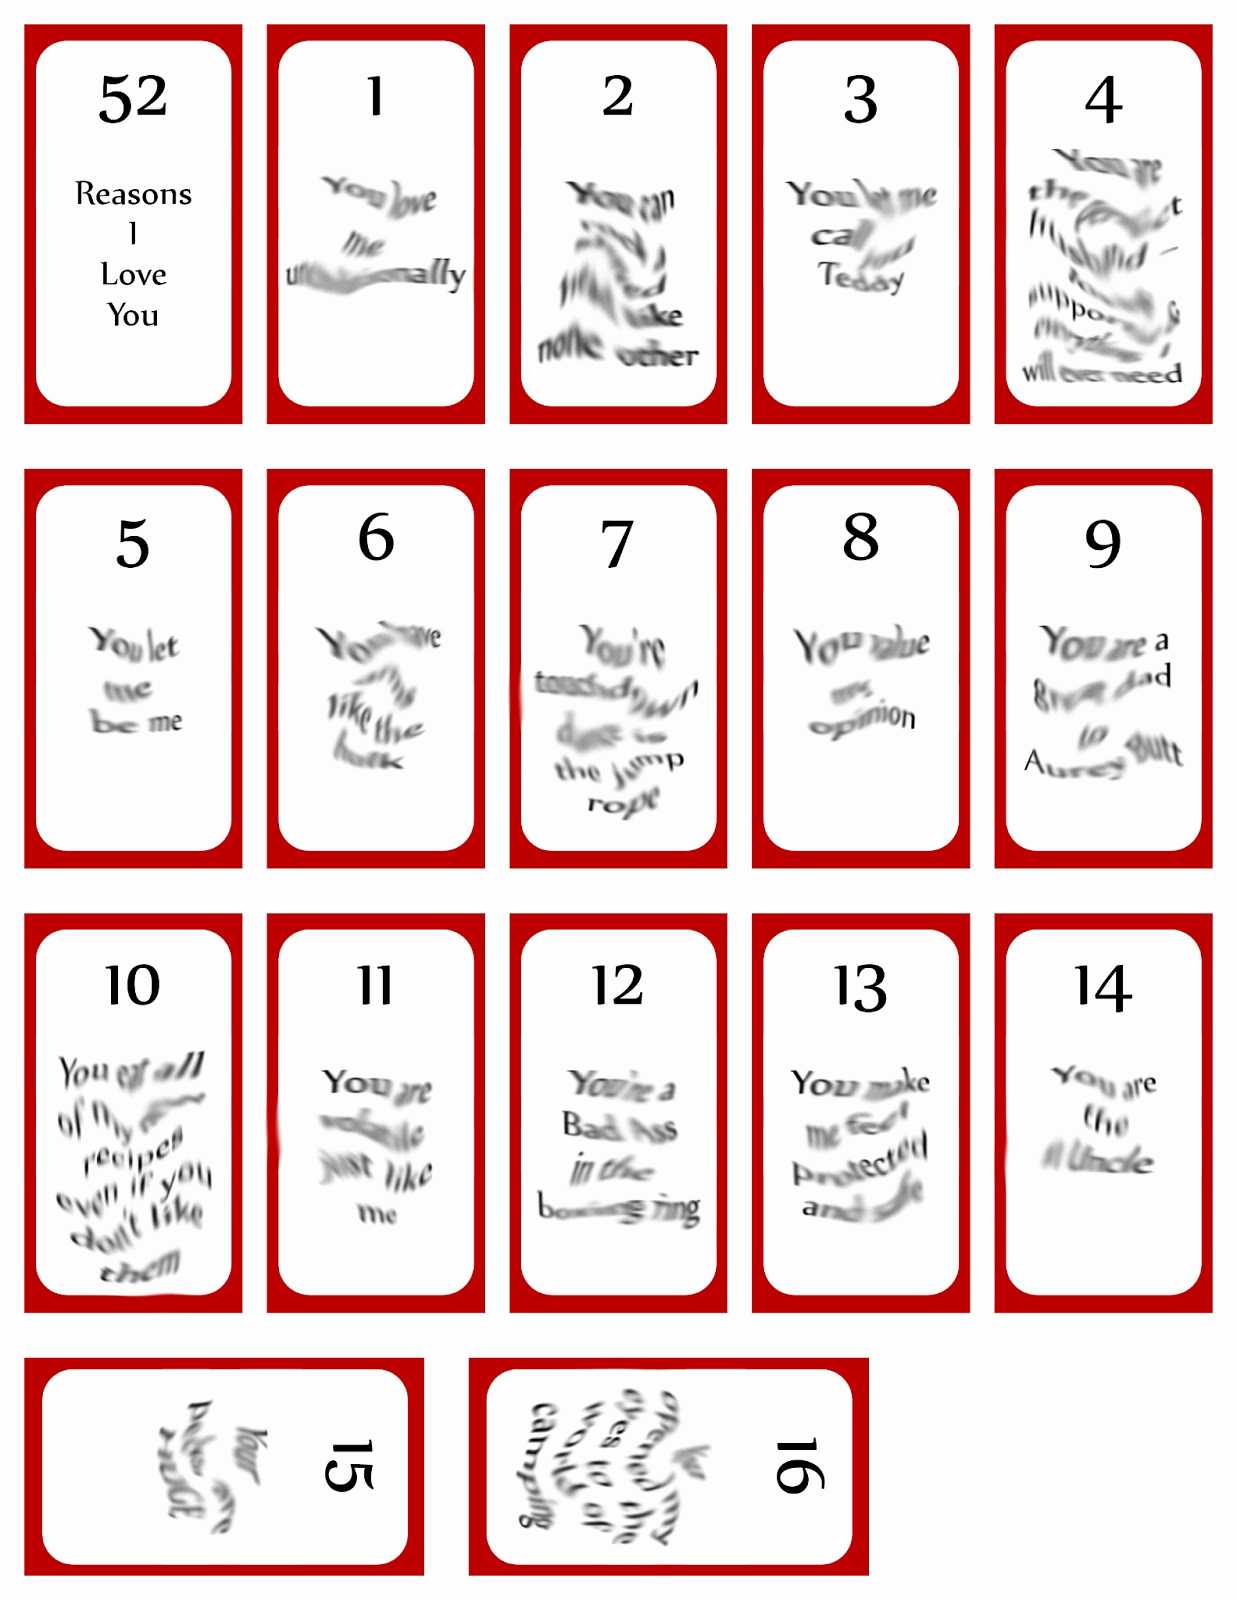 52 Reasons Why I Love You Cards Printable Templates Free Regarding 52 Reasons Why I Love You Cards Templates